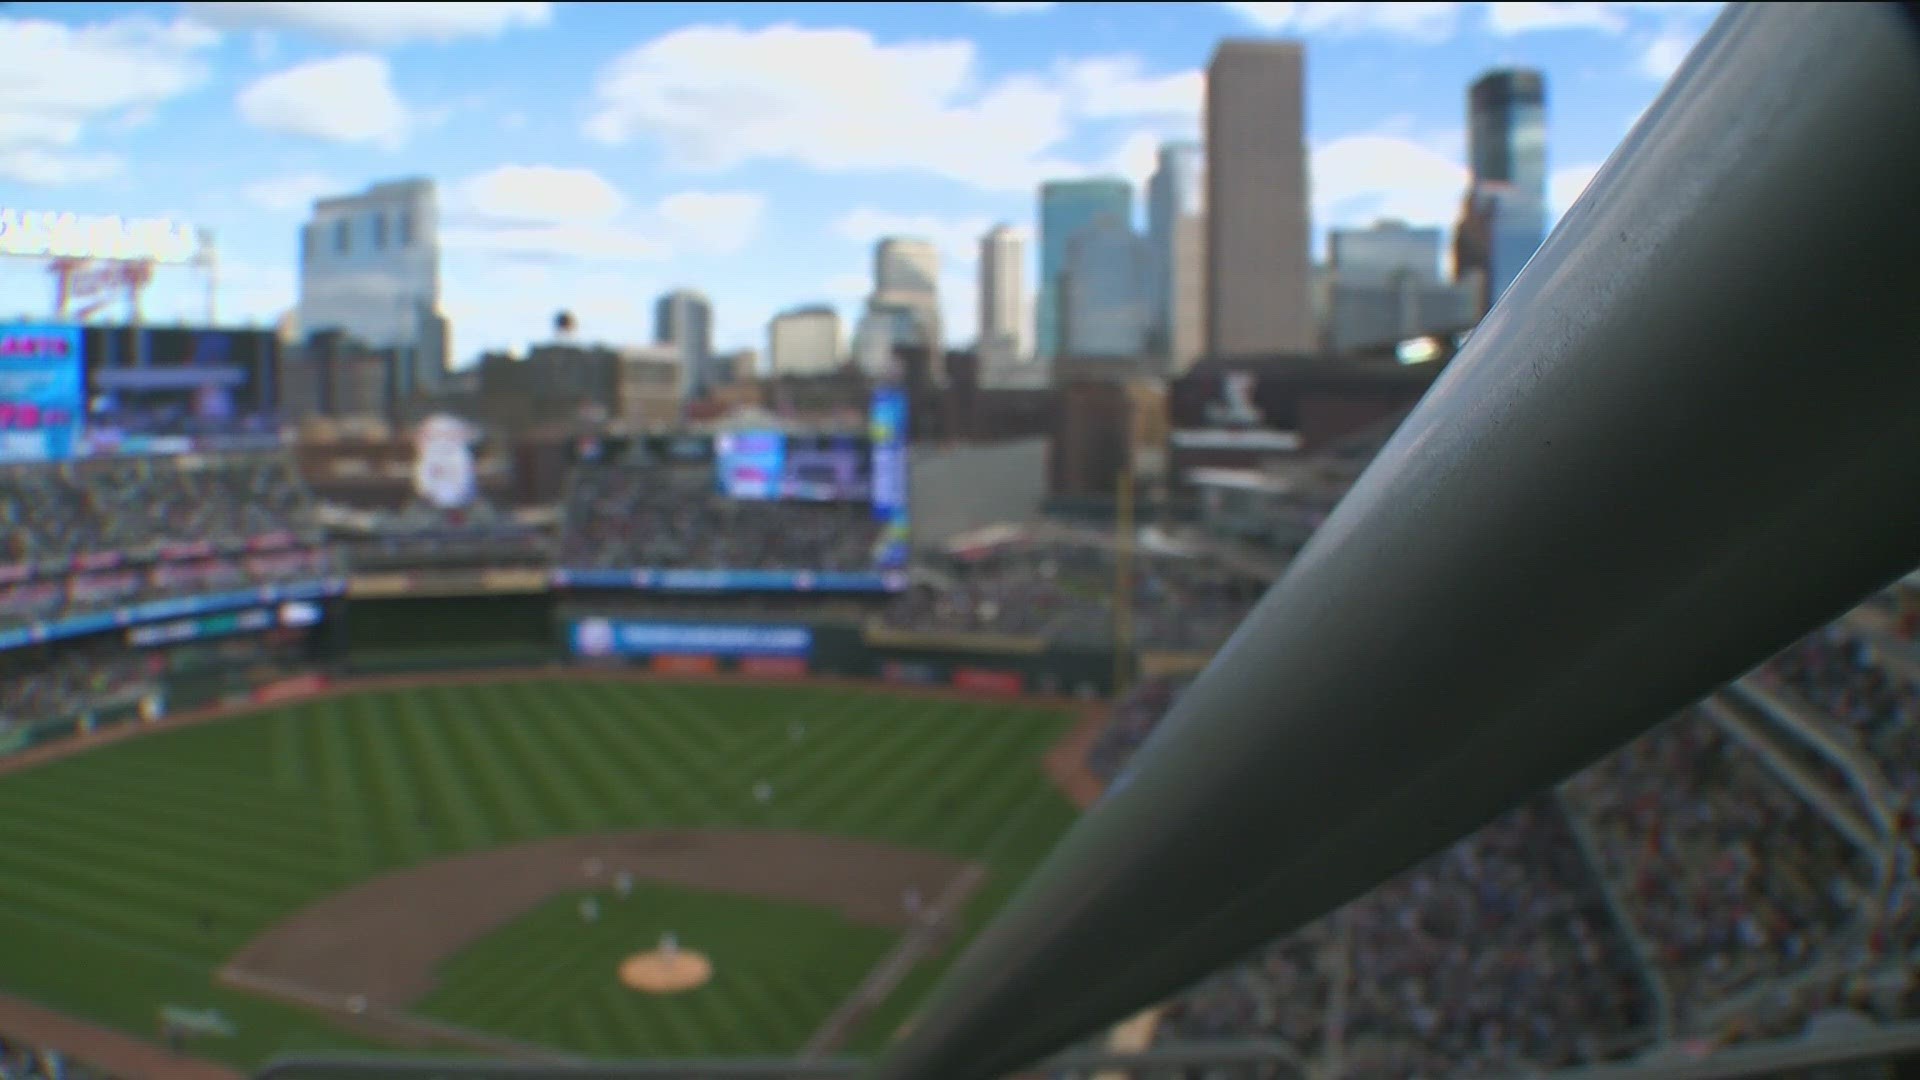 The Target Field crowd was still riding high after the Twins broke an 18-game playoff losing streak last October.